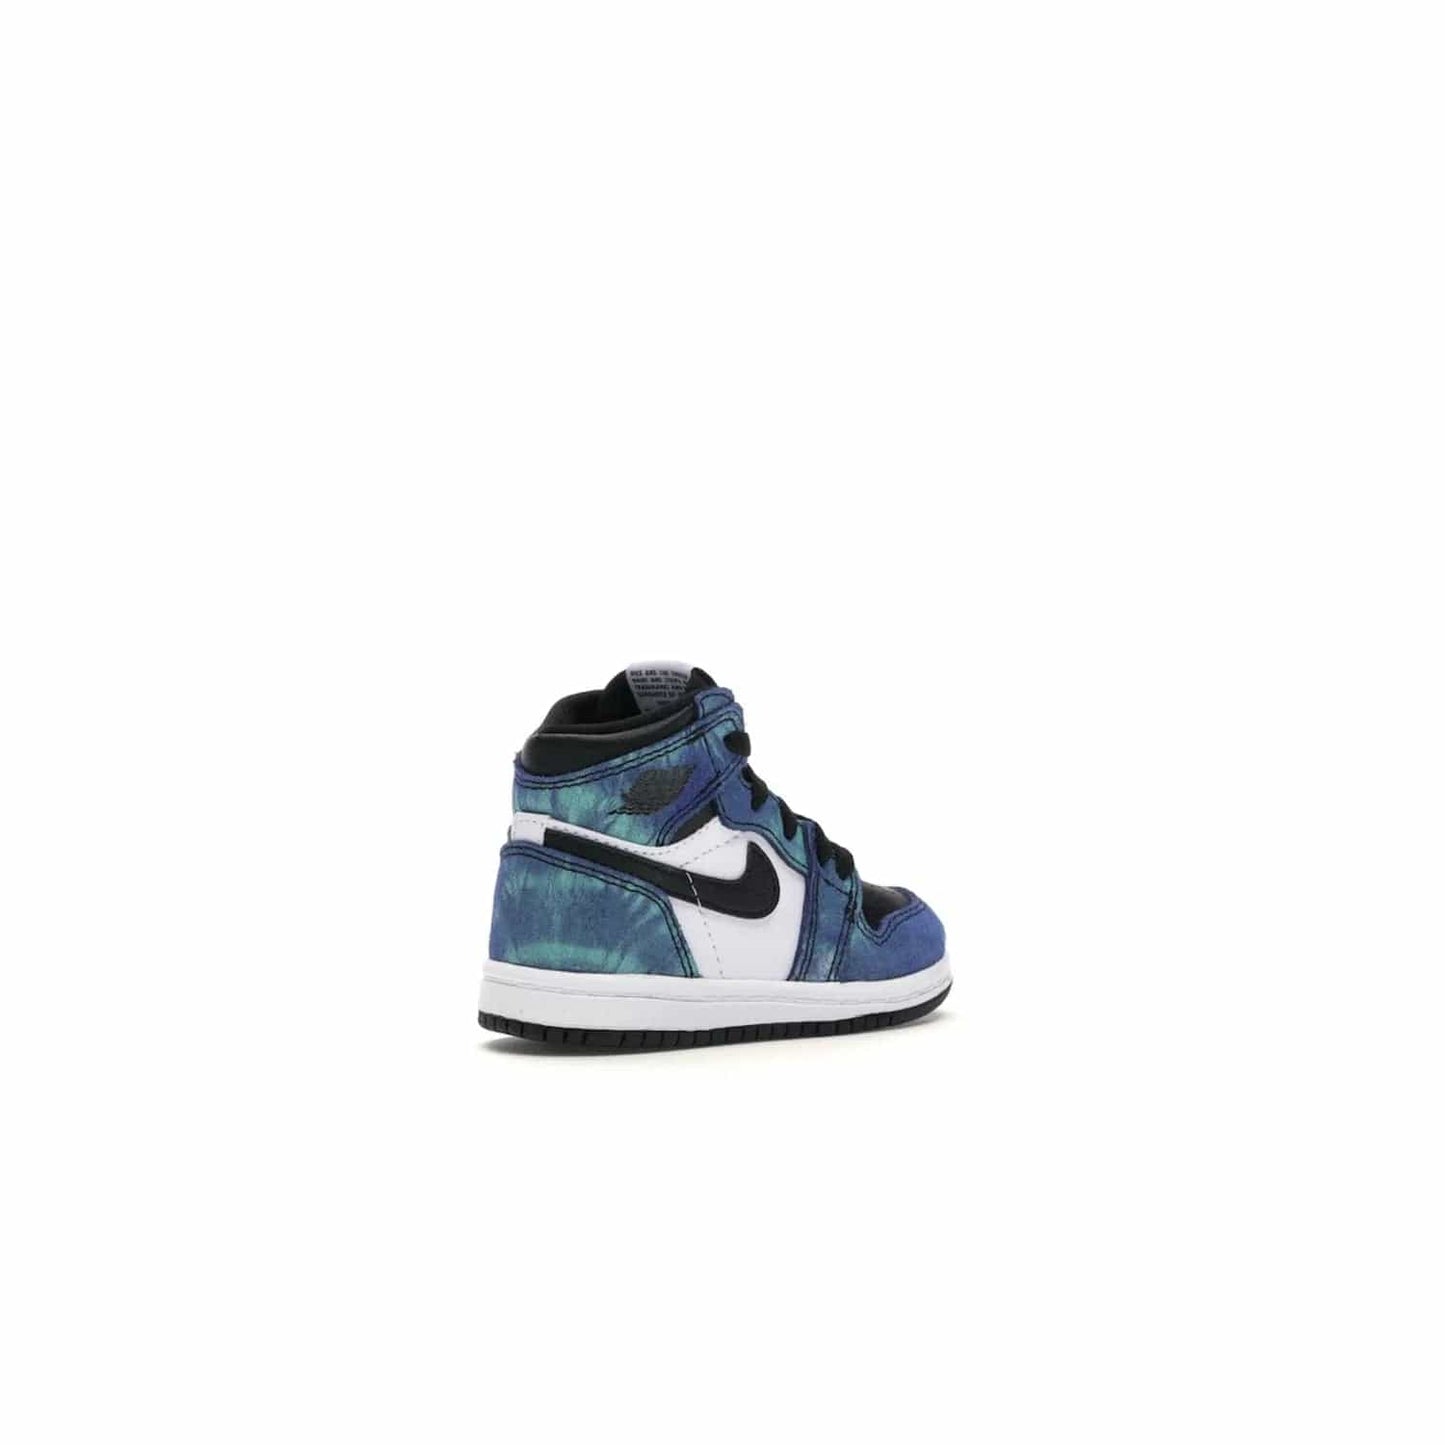 Jordan 1 Retro High Tie Dye (TD) - Image 33 - Only at www.BallersClubKickz.com - Add a unique twist to your sneaker collection with the Jordan 1 Retro High Tie Dye (TD). Classic Air Jordan 1 details like toe box perforations and the signature Swoosh logo on the sidewall are topped with an eye-catching tie dye design that’s perfect for styling all year round.